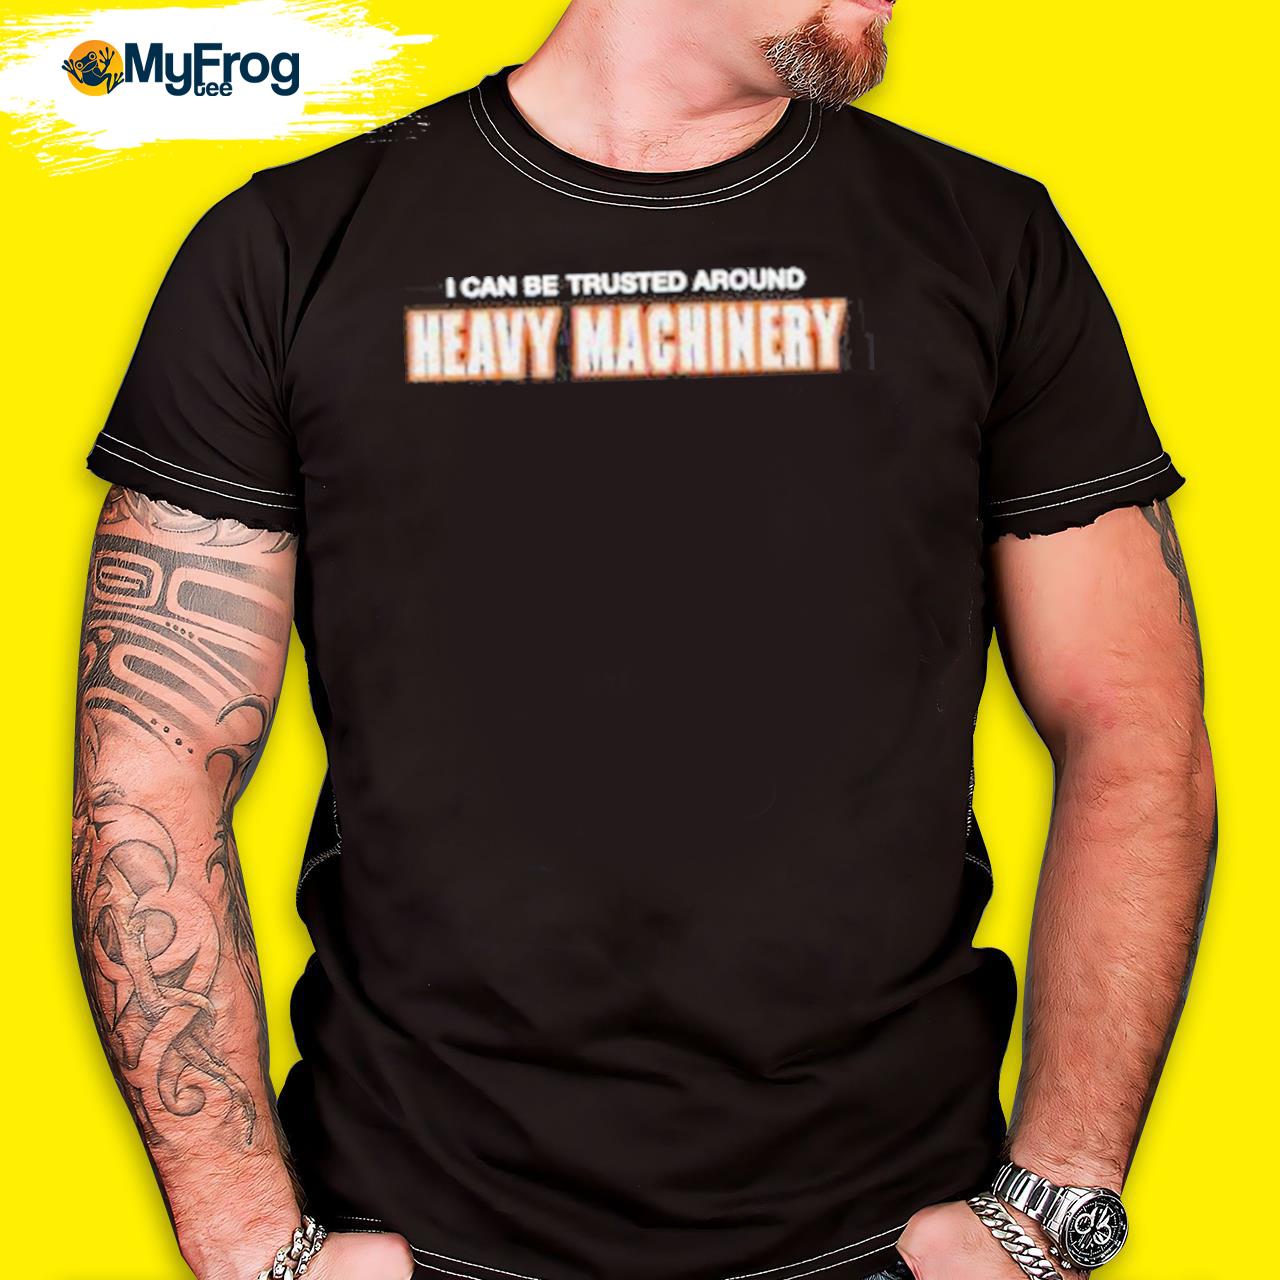 I Can Be Trusted Around Heavy Machinery shirt